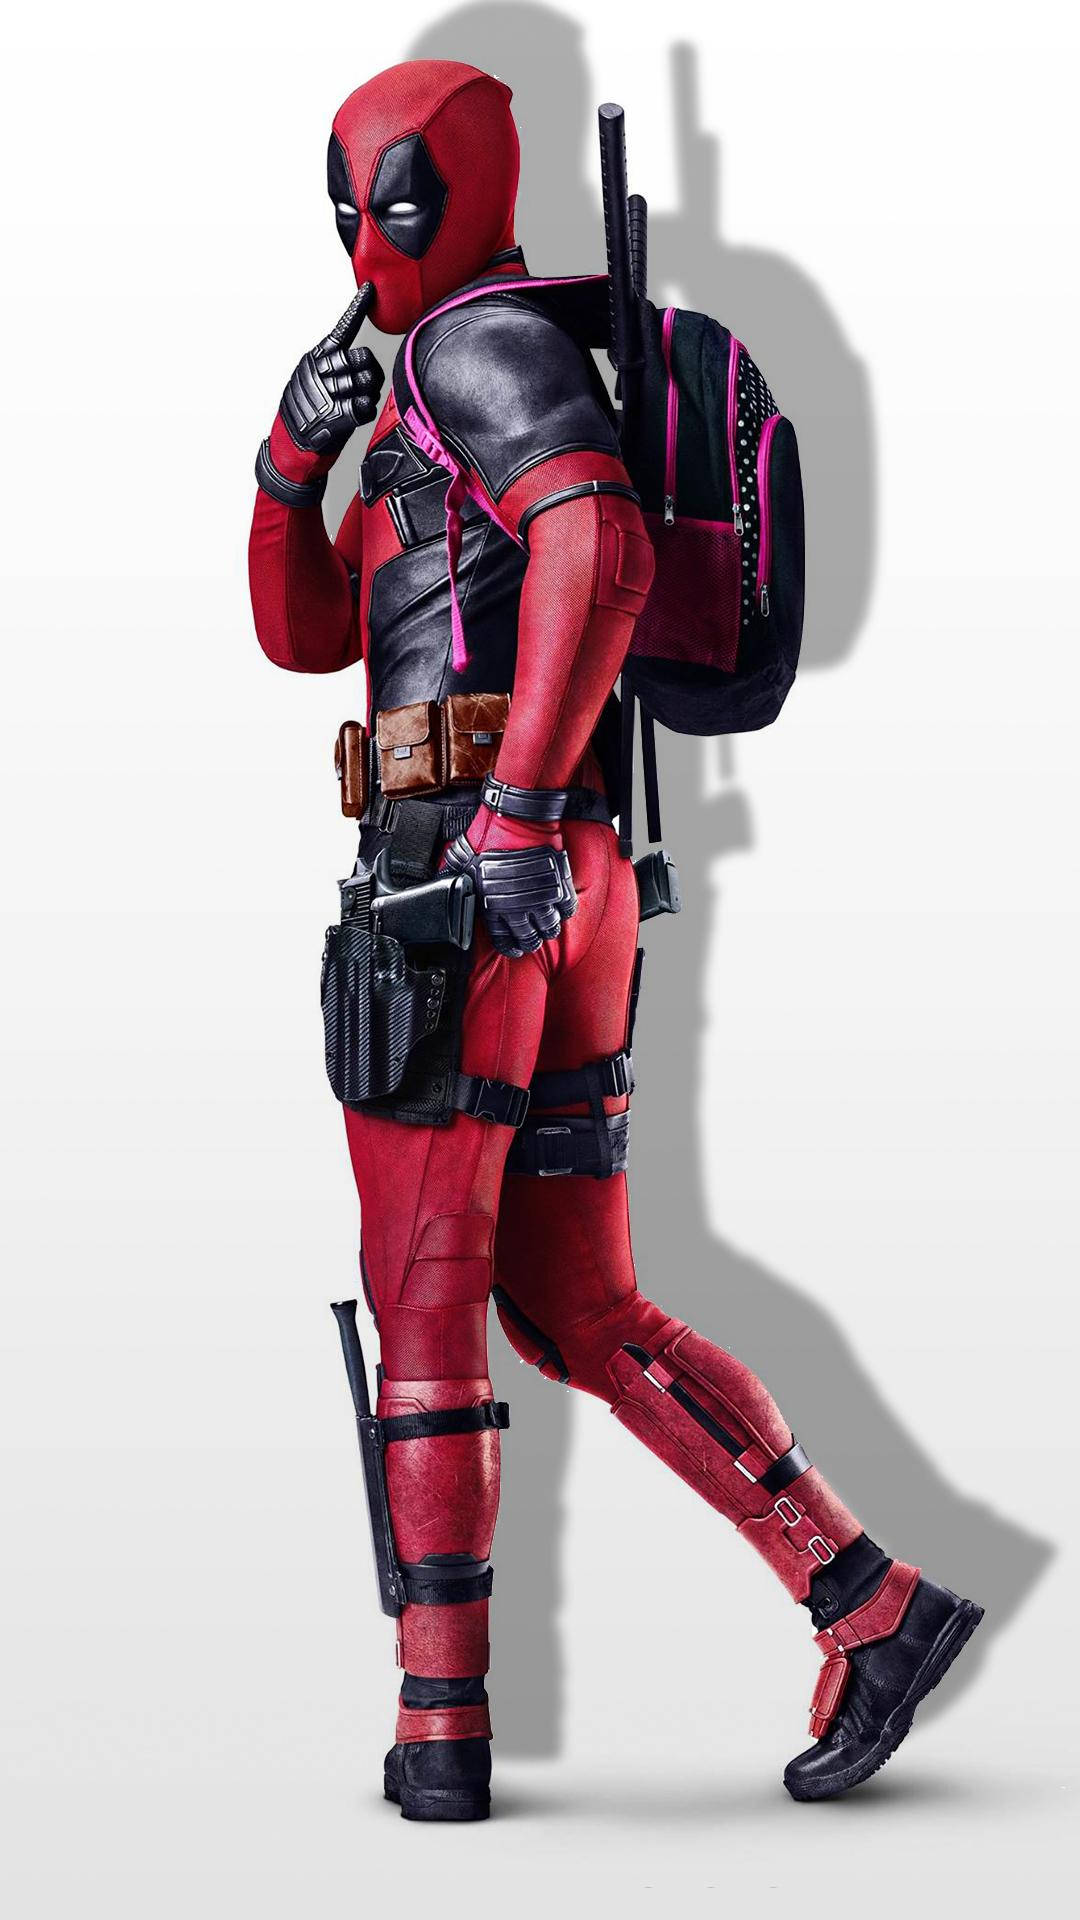 1080p Hd Deadpool With Girly Backpack